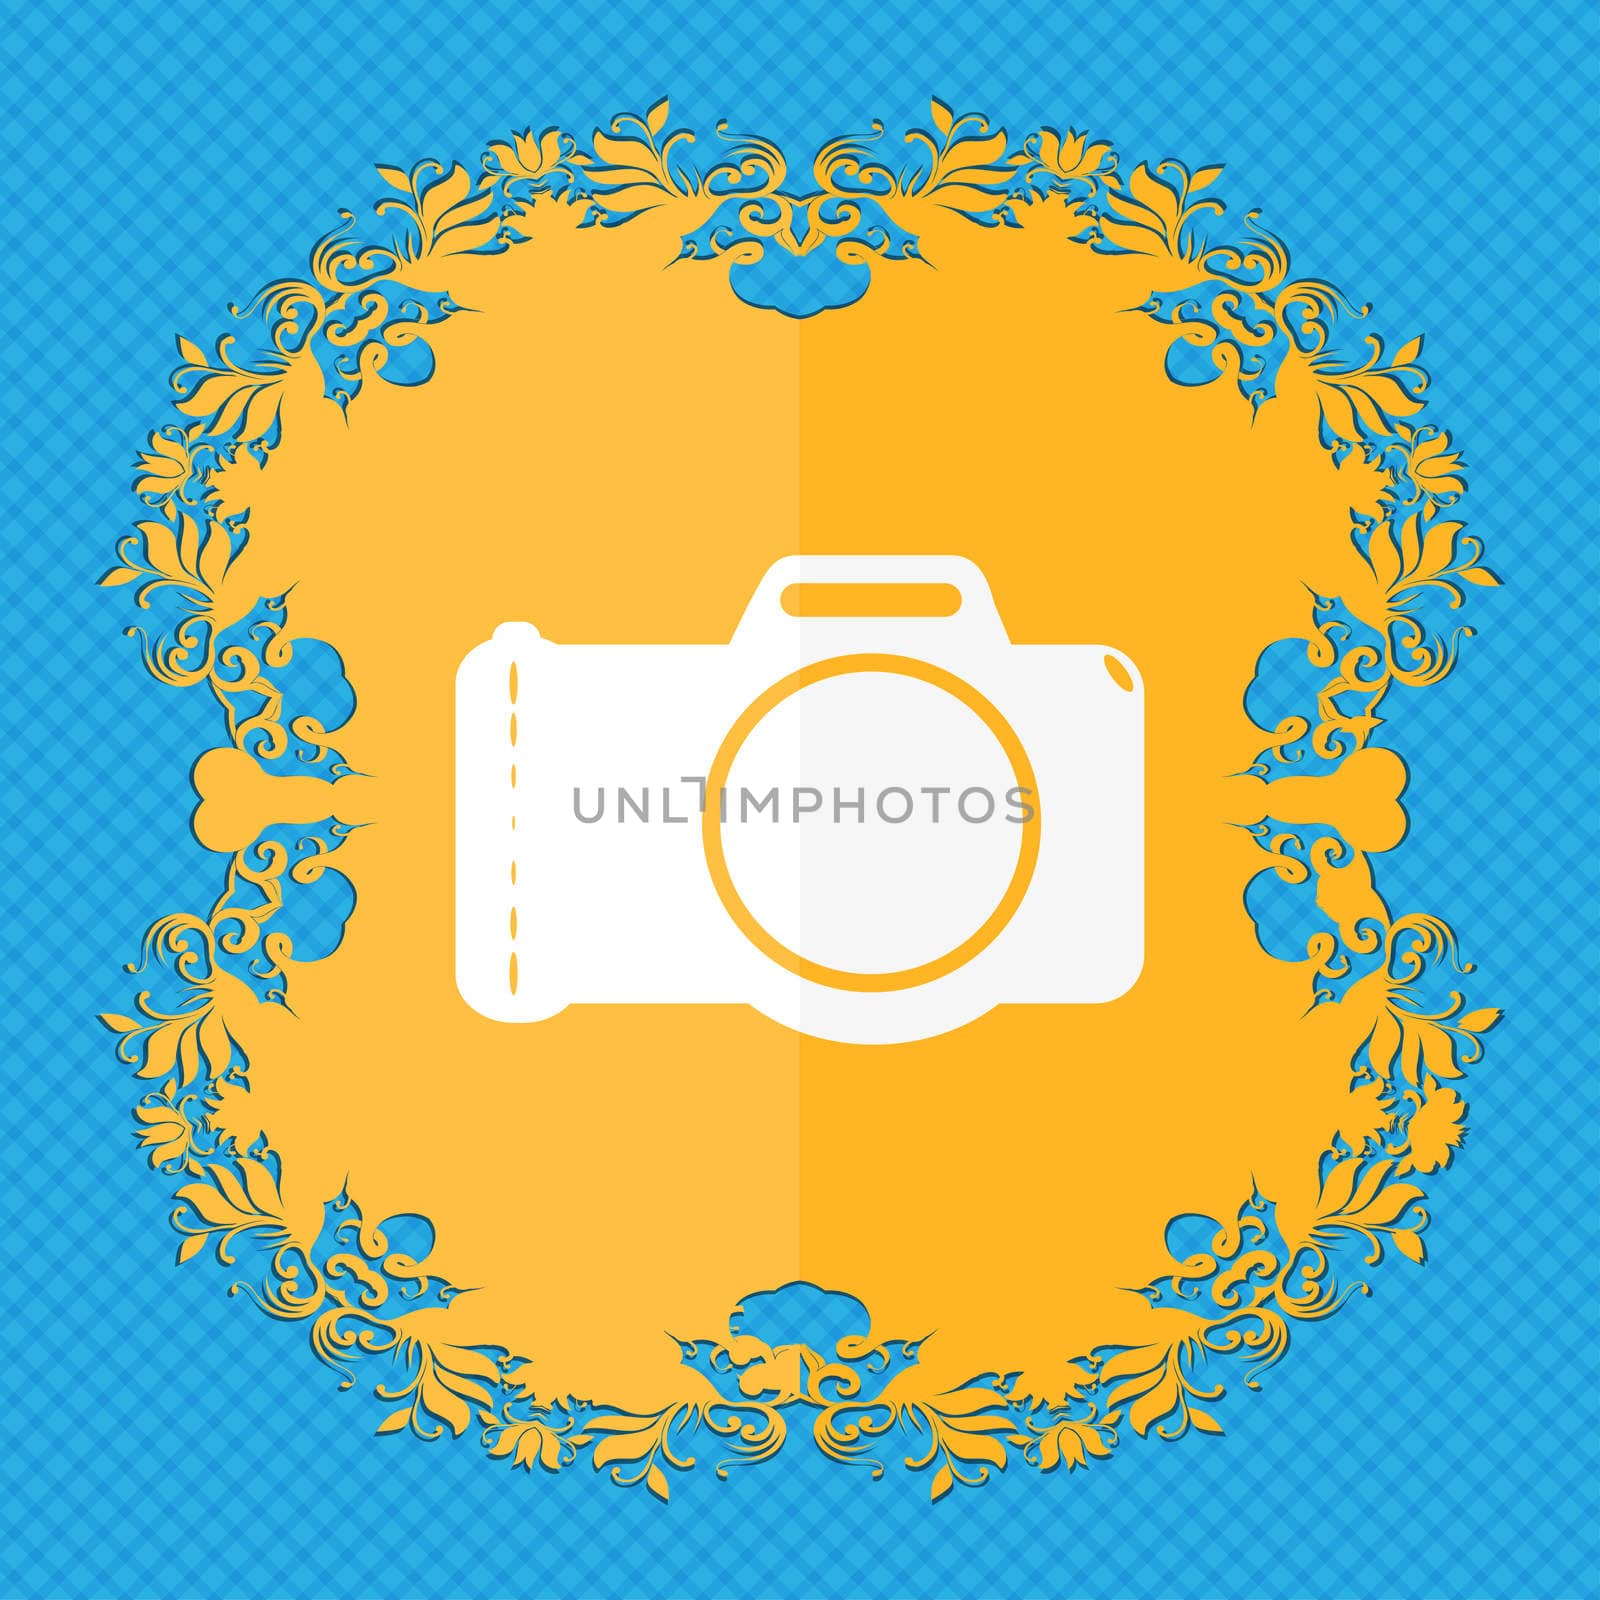 Photo camera sign icon. Digital photo camera symbol. Floral flat design on a blue abstract background with place for your text. illustration